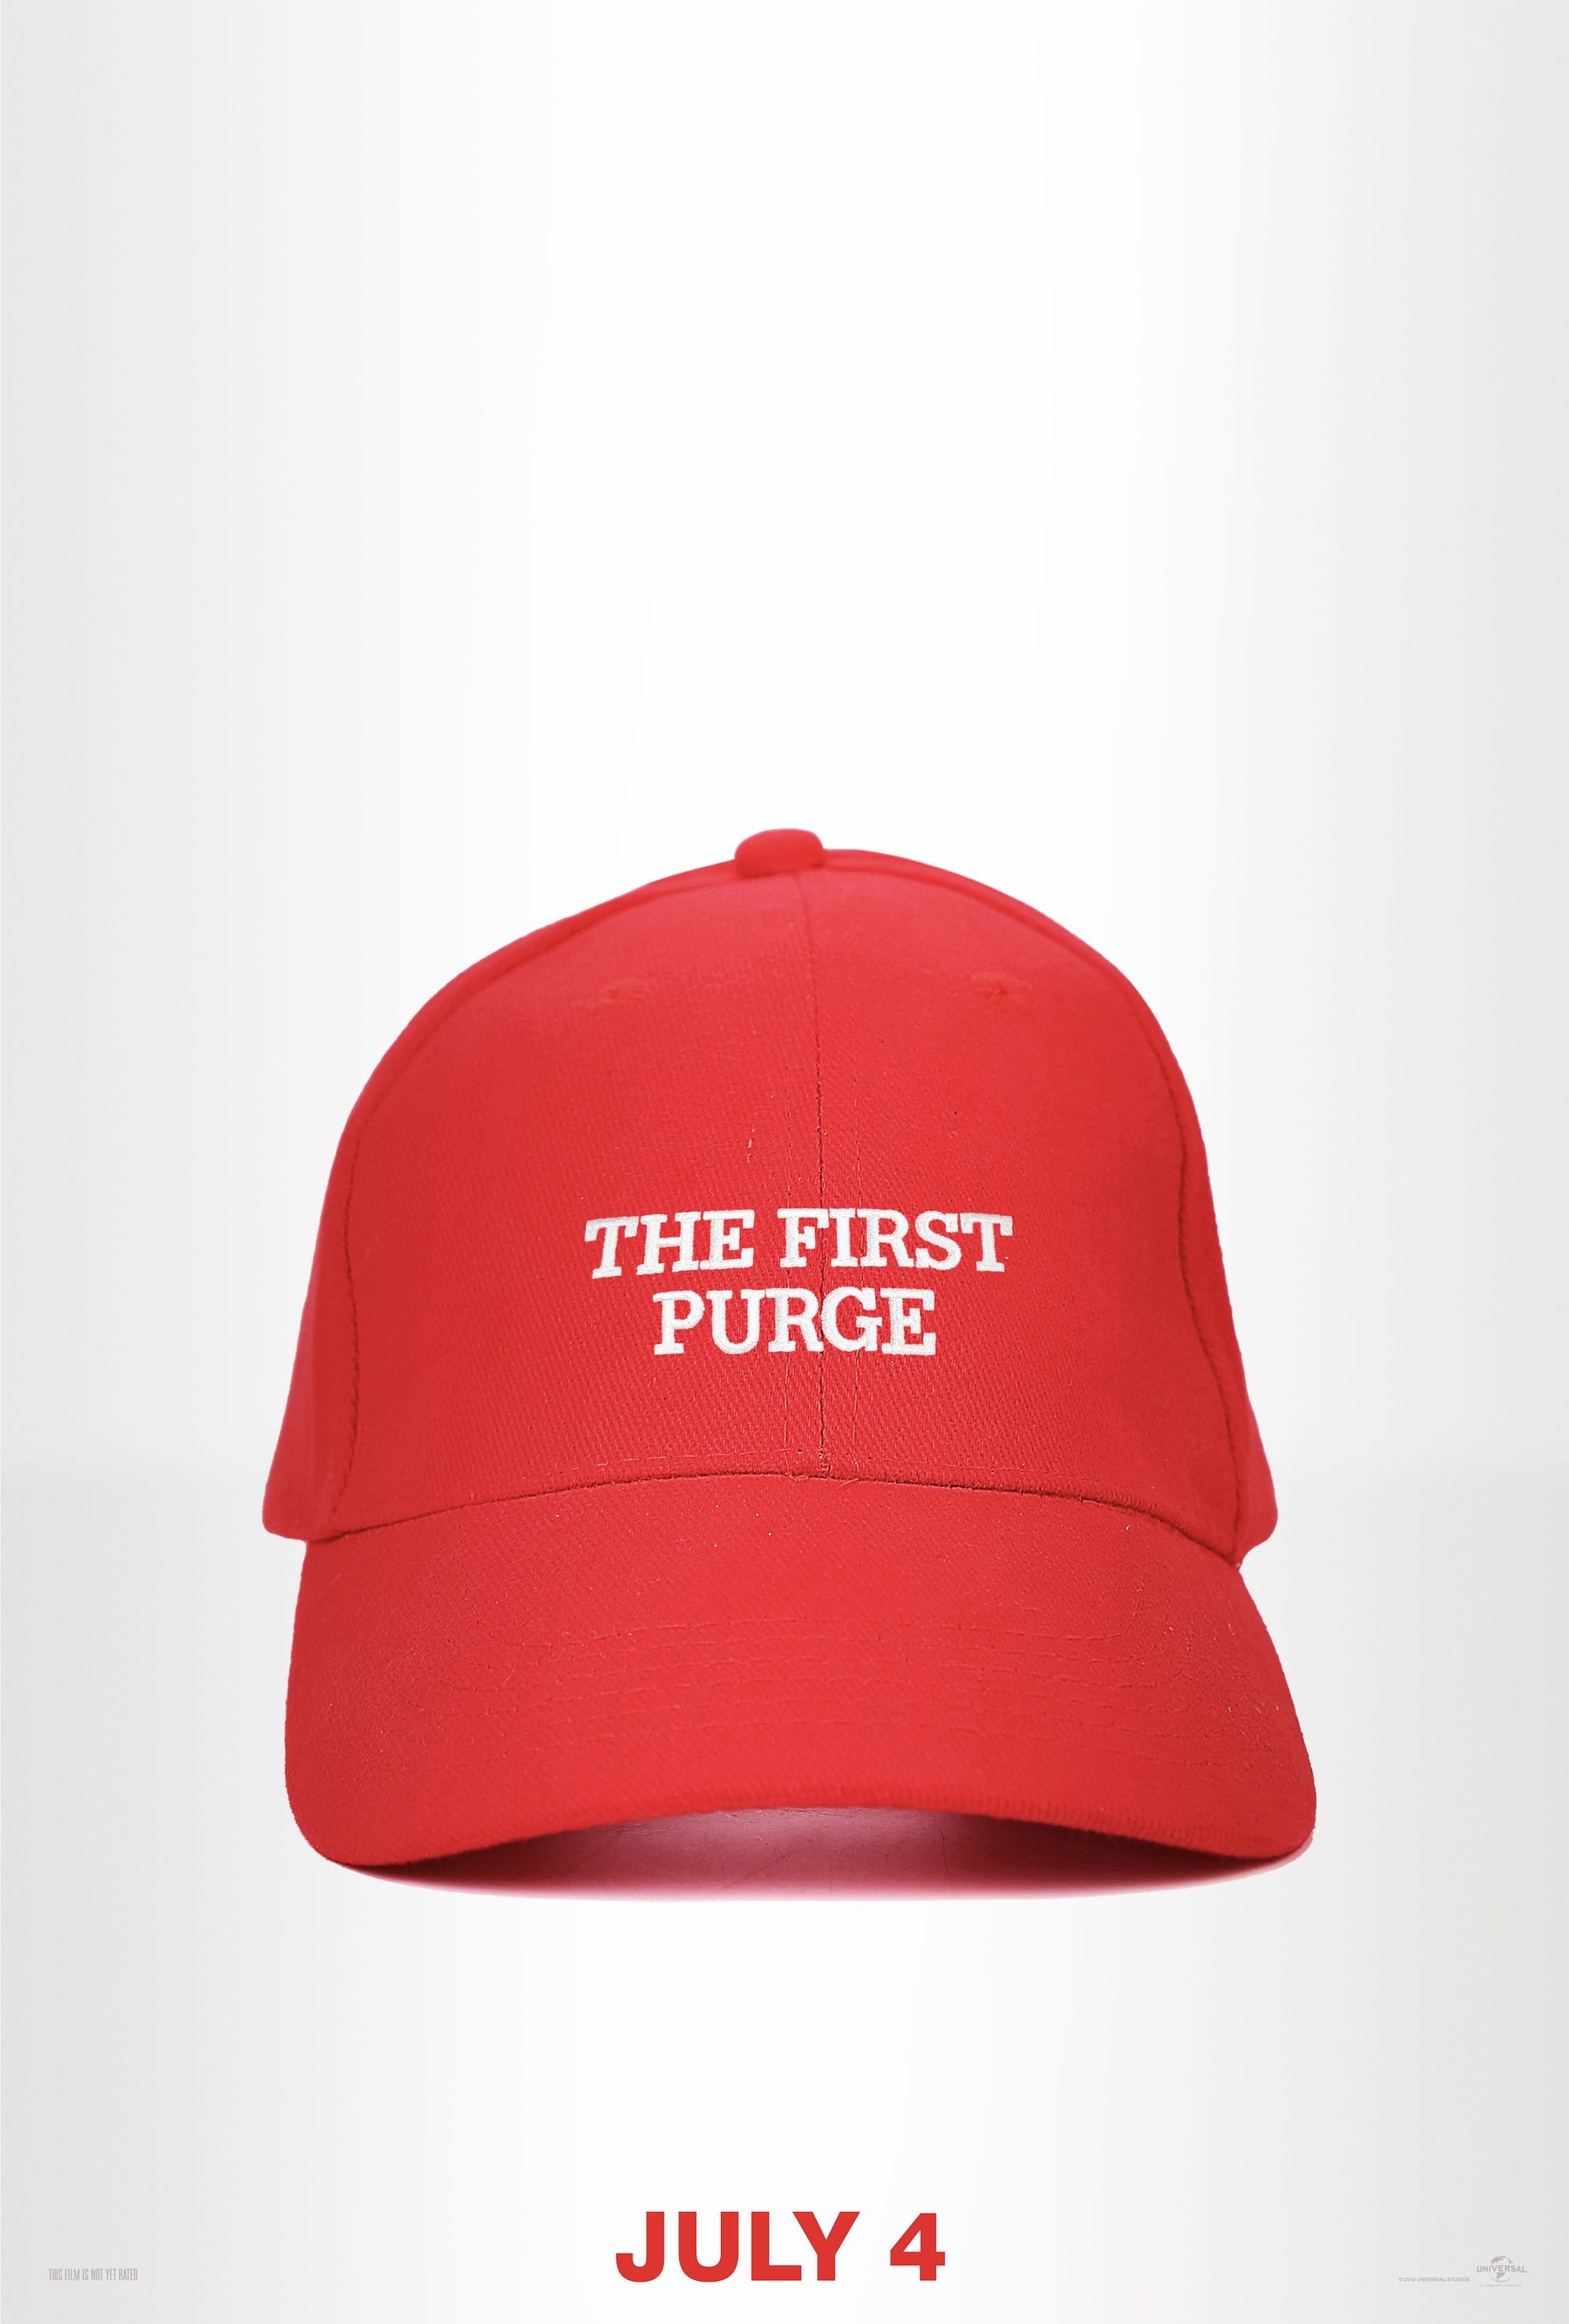 The First Purge Teaser Poster